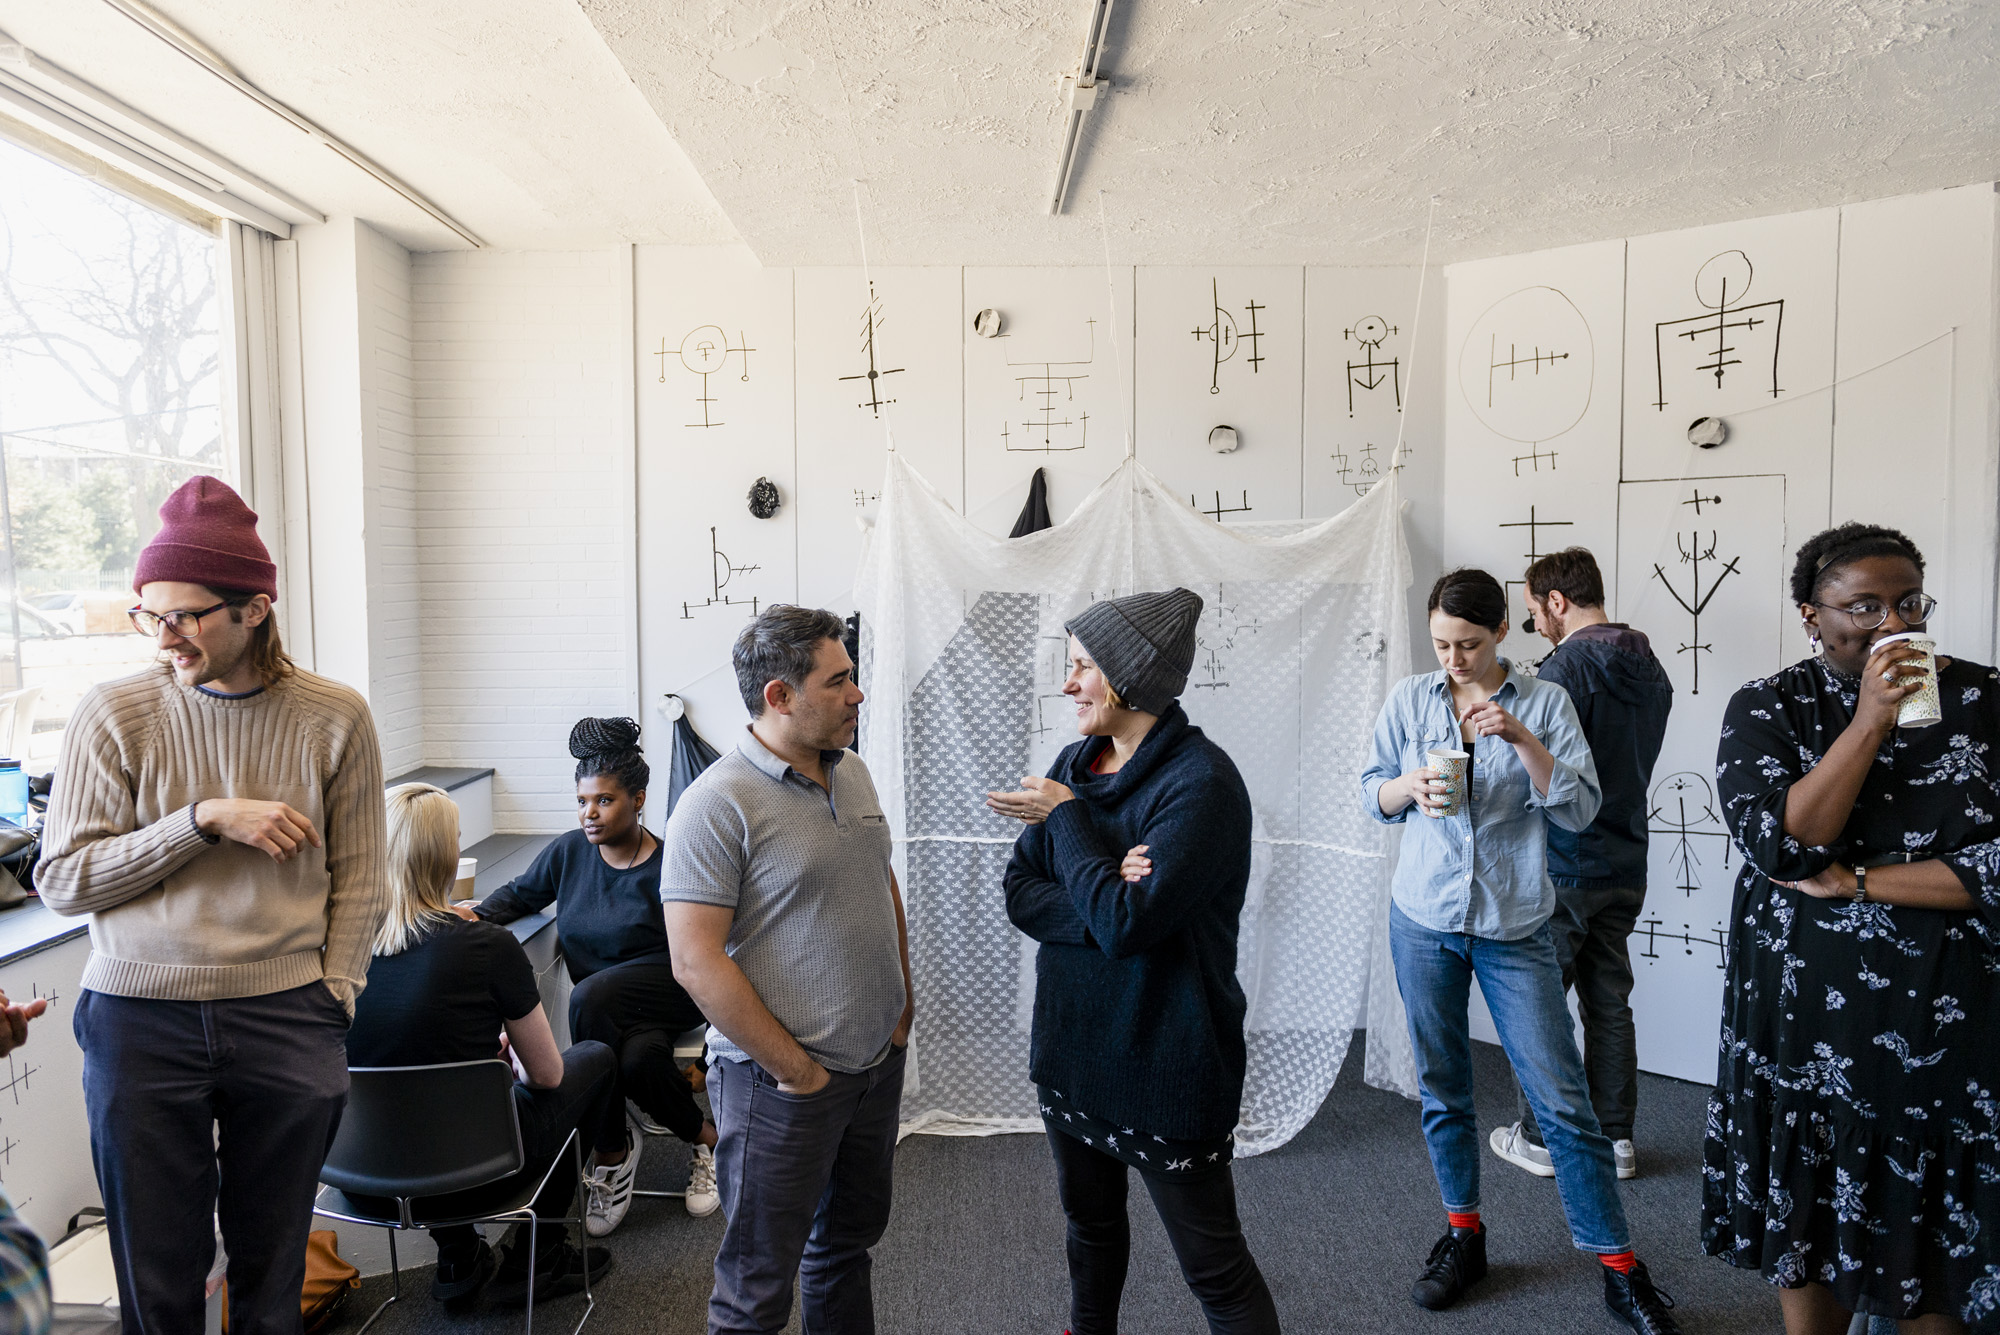 Image: A group of people standing inside Roman Susan. Zuri Washington (far right) transformed the space by painting black sigils on the white walls and adding fiber elements. Event co-curator Adia Sykes (back left) is sitting at a table with event attendee and facilitating a tarot card reading. Photo by Ryan Edmund.